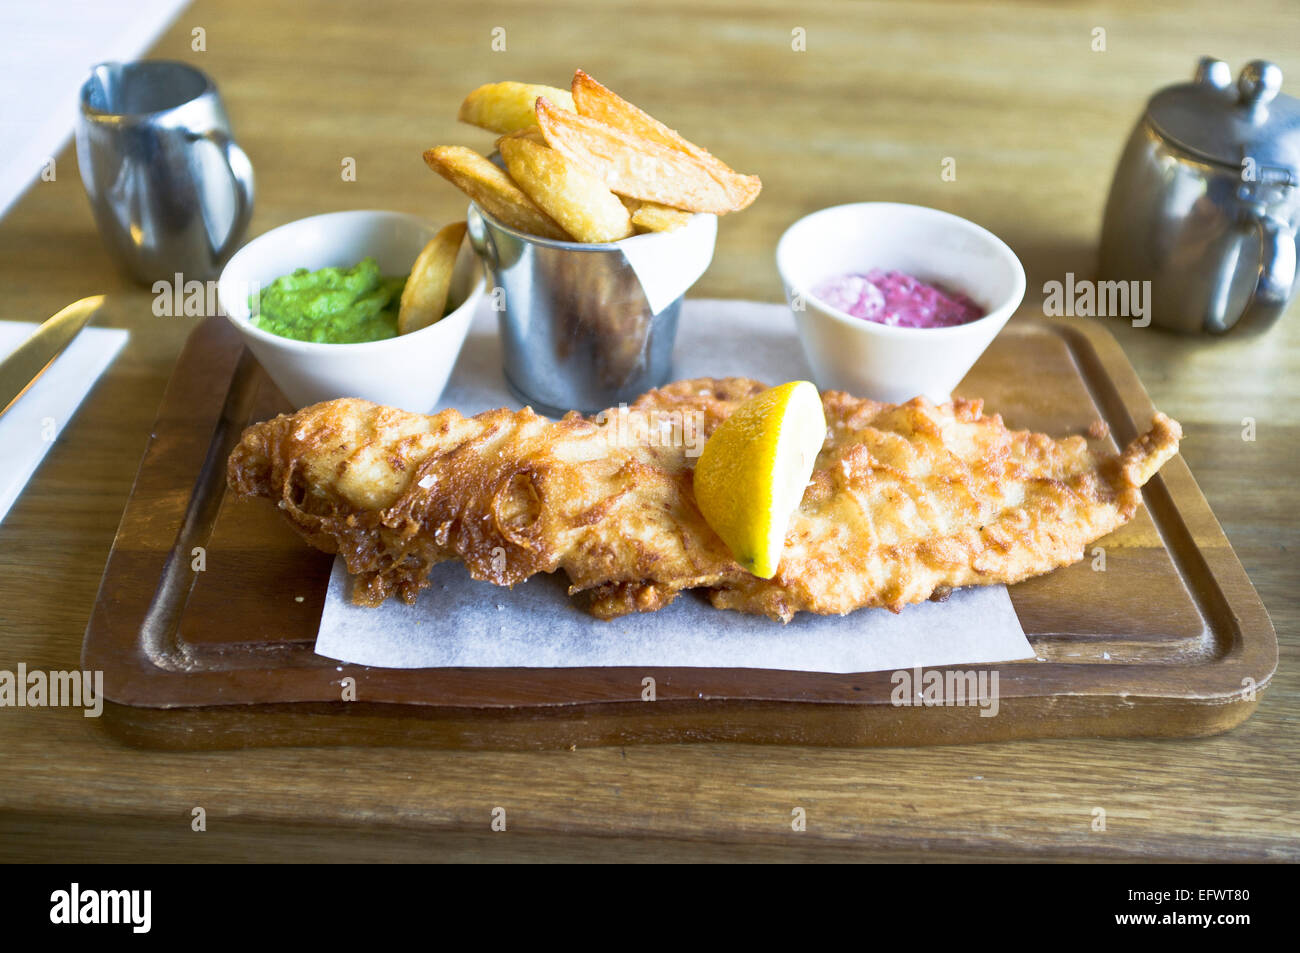 dh Edinburgh meal BATTERED FISH UK SCOTLAND Scottish Posh fish and chips on plate cooked food Stock Photo